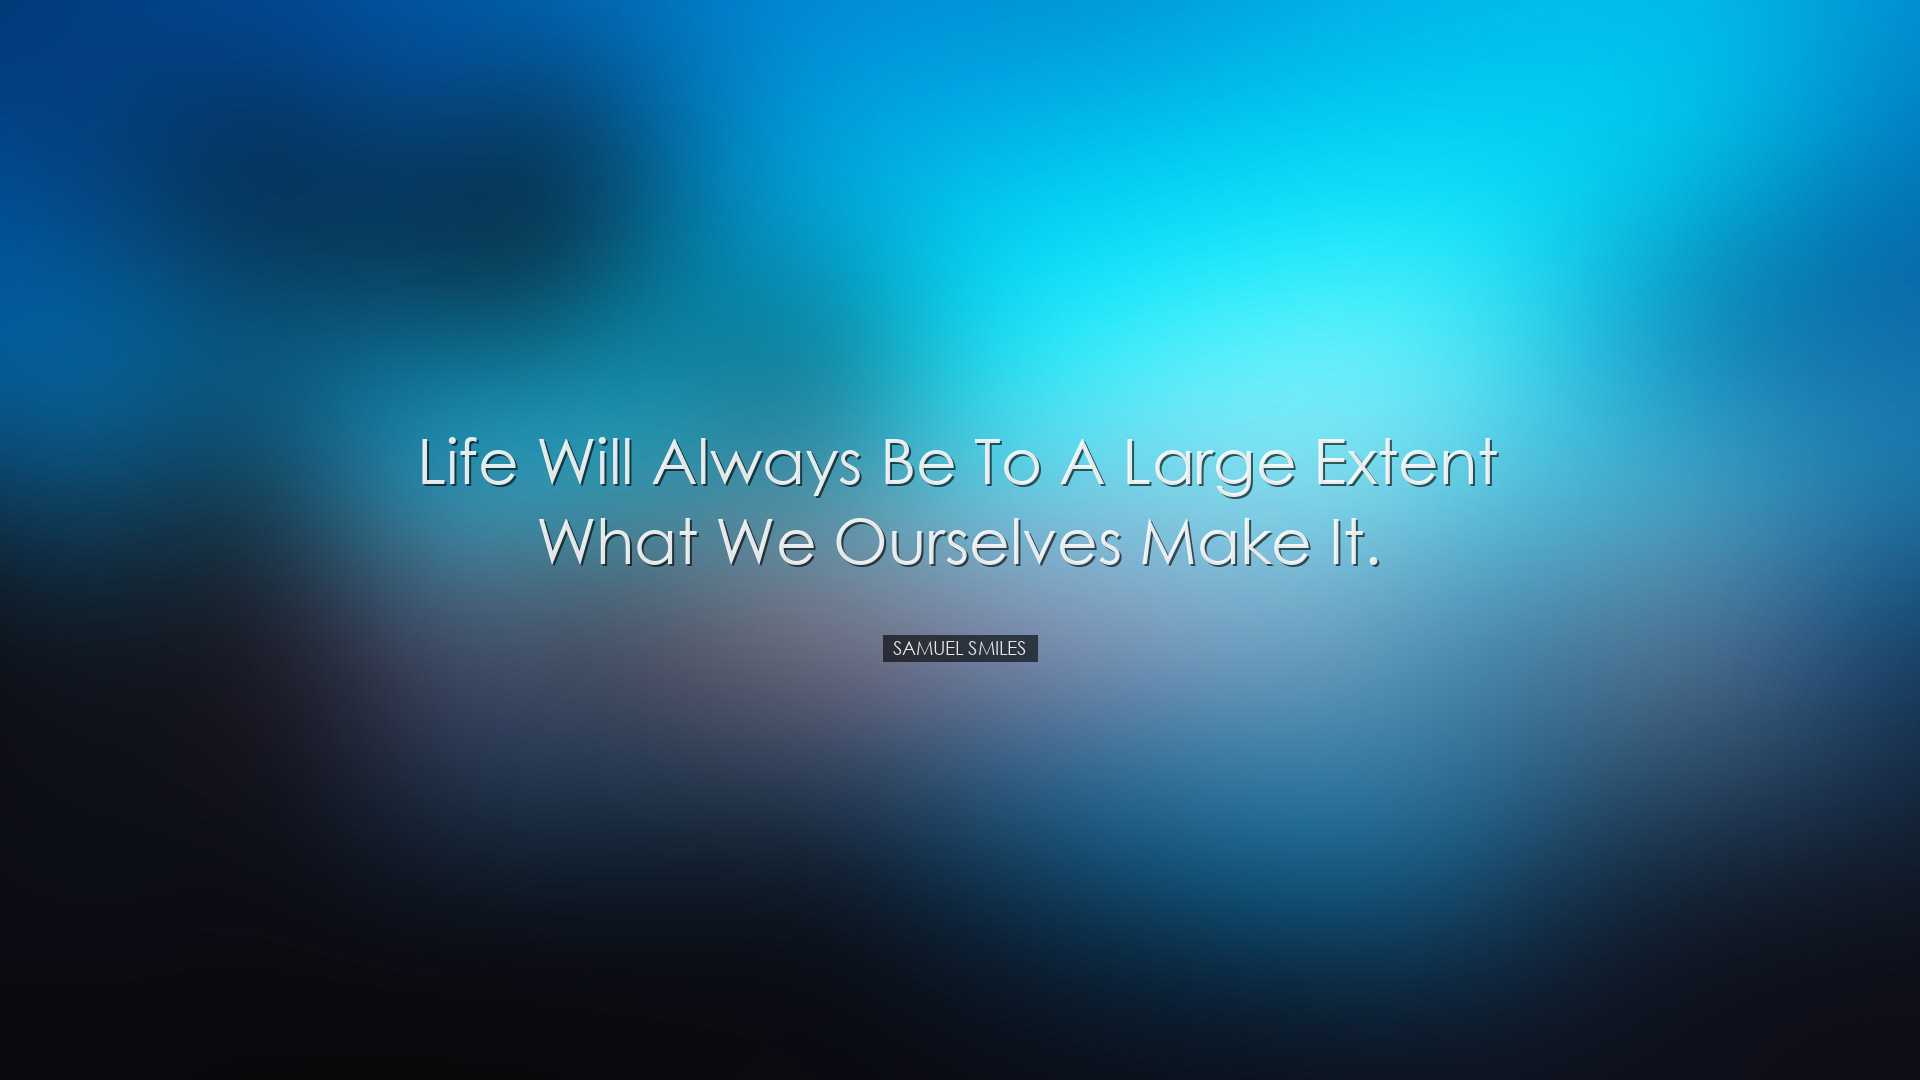 Life will always be to a large extent what we ourselves make it. -